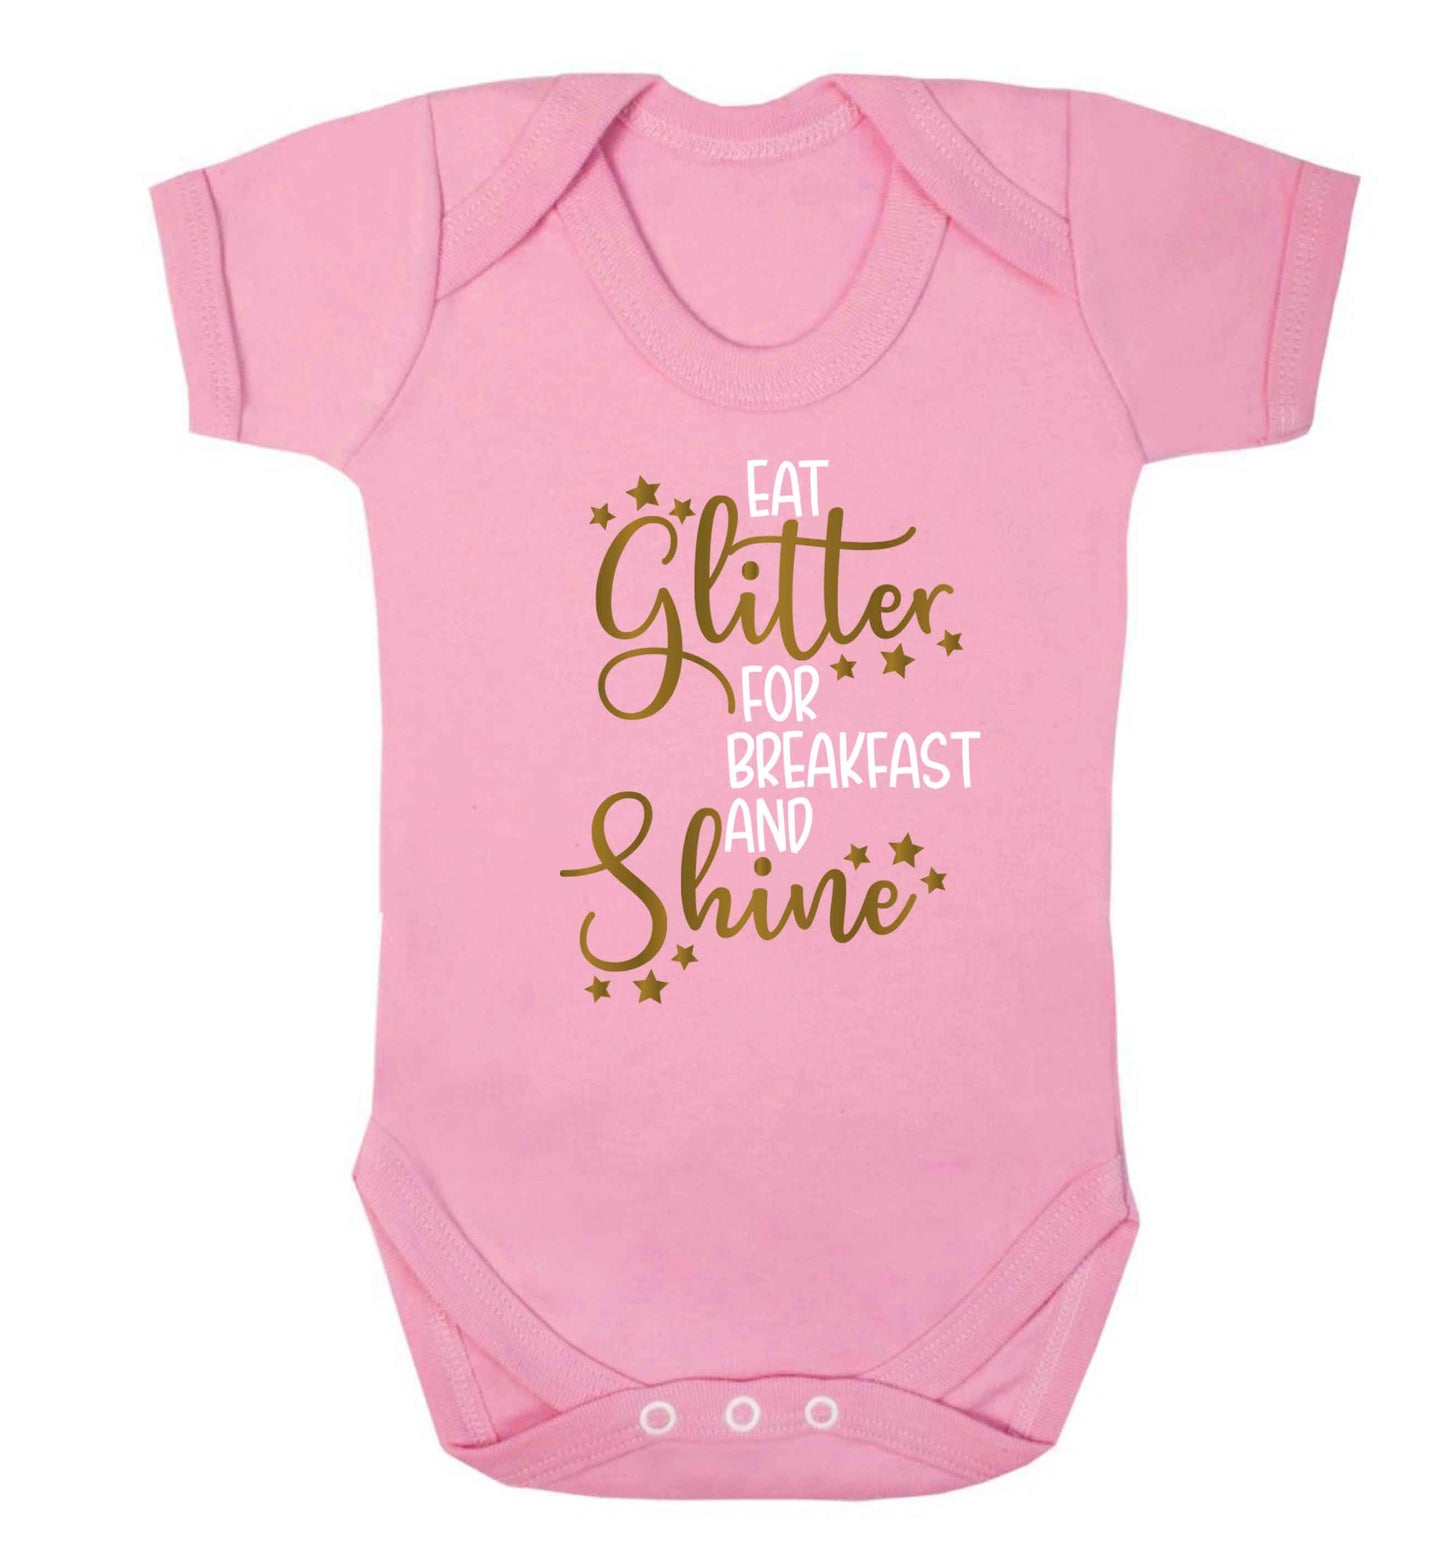 Eat glitter for breakfast and shine all day Baby Vest pale pink 18-24 months